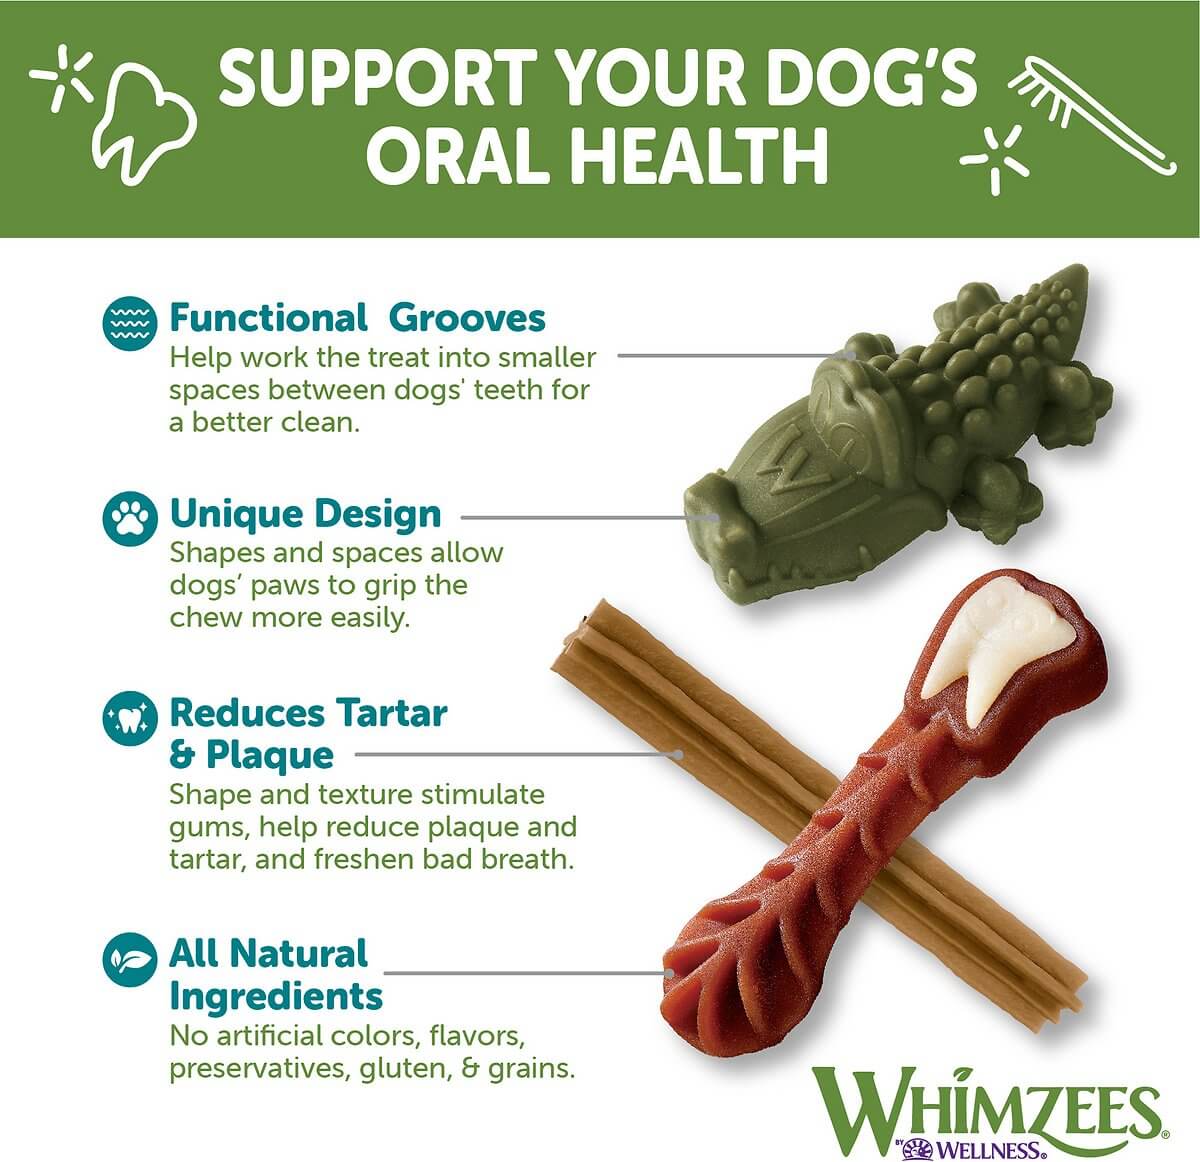 Whimzees Dog Treats - Dental Chews Value Pack Info Panel